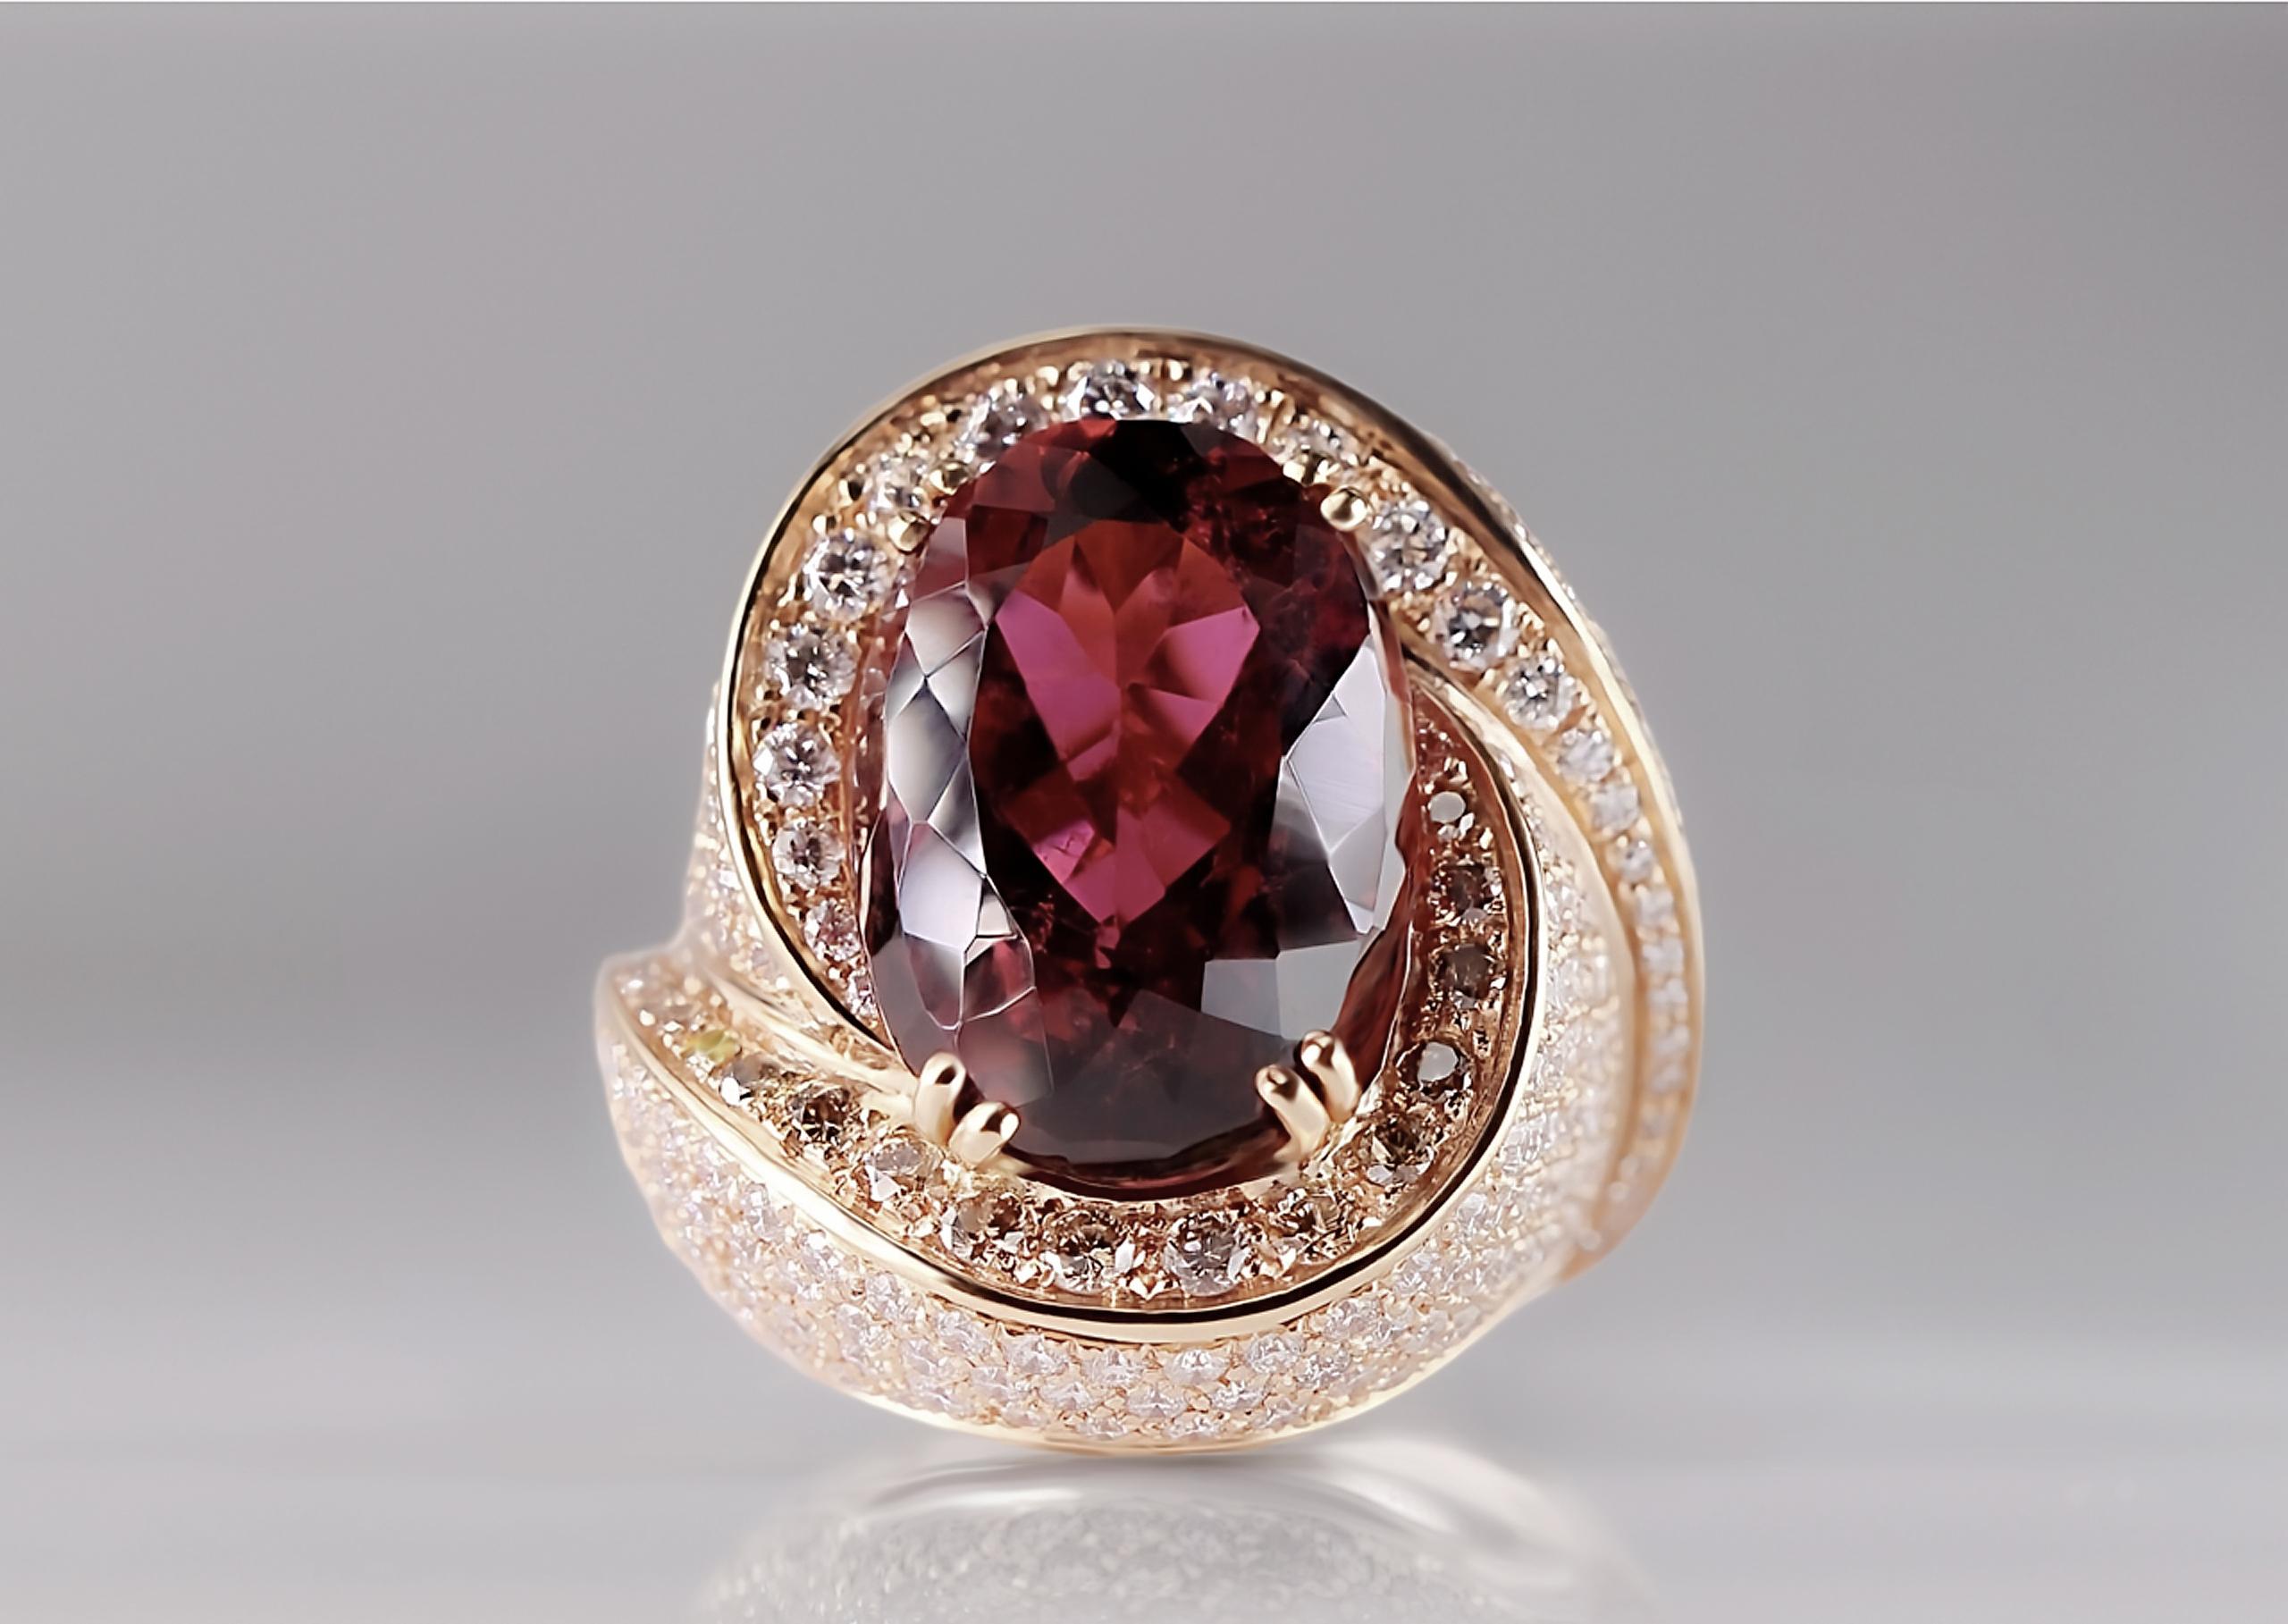 This beautiful ring showcases the exceptional craftsmanship of Italian goldsmith's art. Crafted with artisan skill and precision, it features an eye-catching three-dimensional design.

At the heart of the ring is a large 19.45 ct oval-shaped red